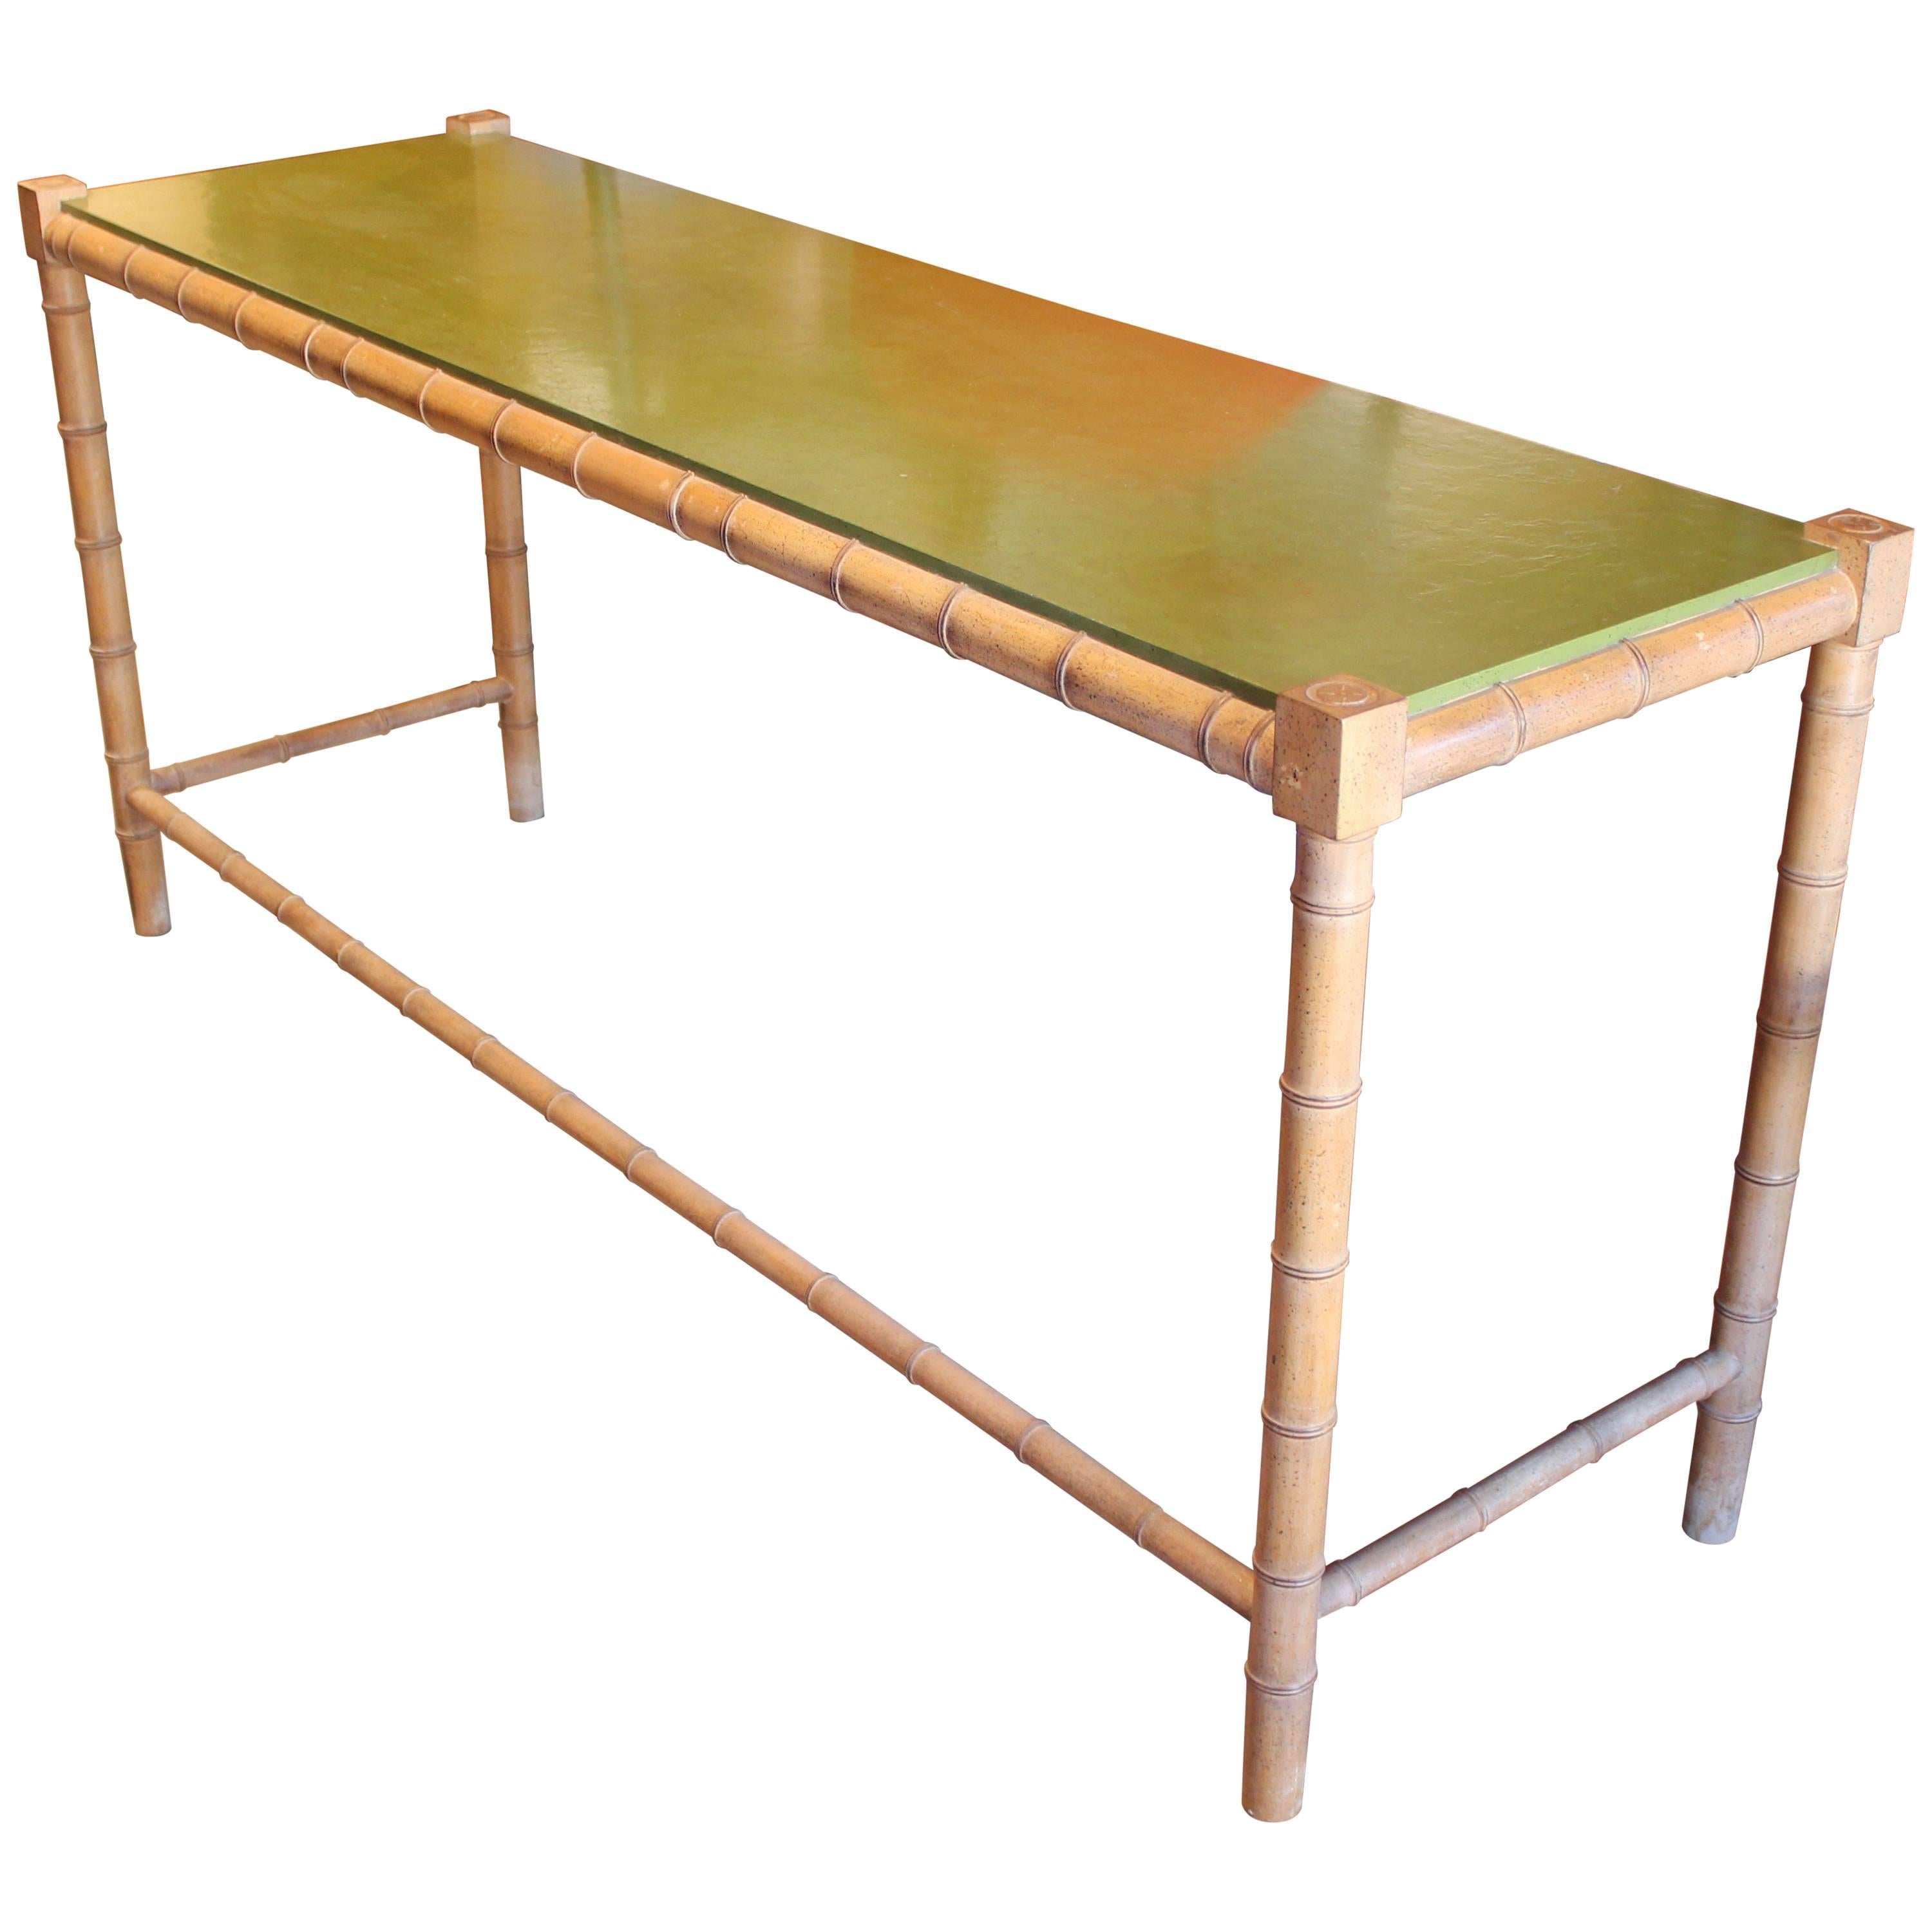 Unique faux bamboo and green top console or serving table. A multi-use table perfect for any space, even as a sofa table. Attributed to Henredon or Baker Furniture. In great vintage condition. 